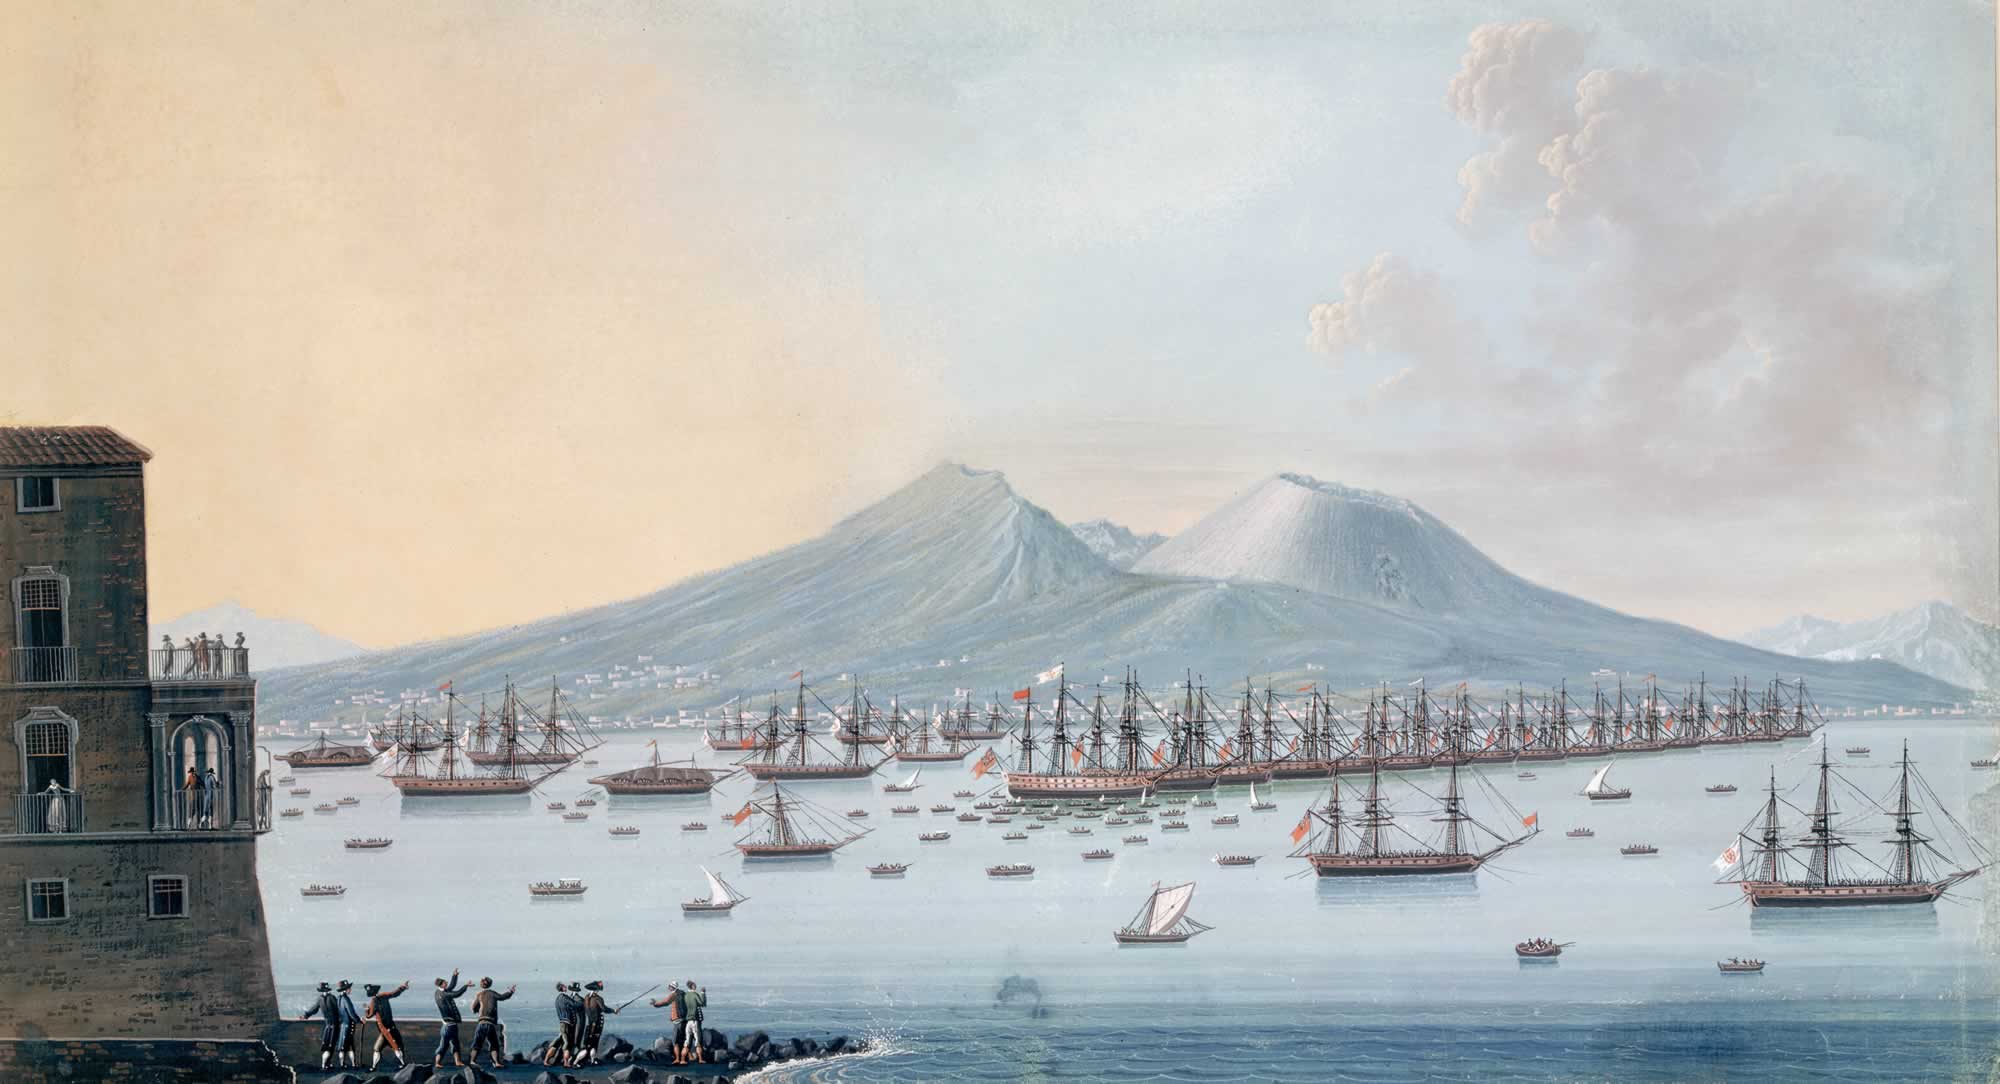 The British Fleet at anchor in the Bay of Naples, June 17th 1798.jpg